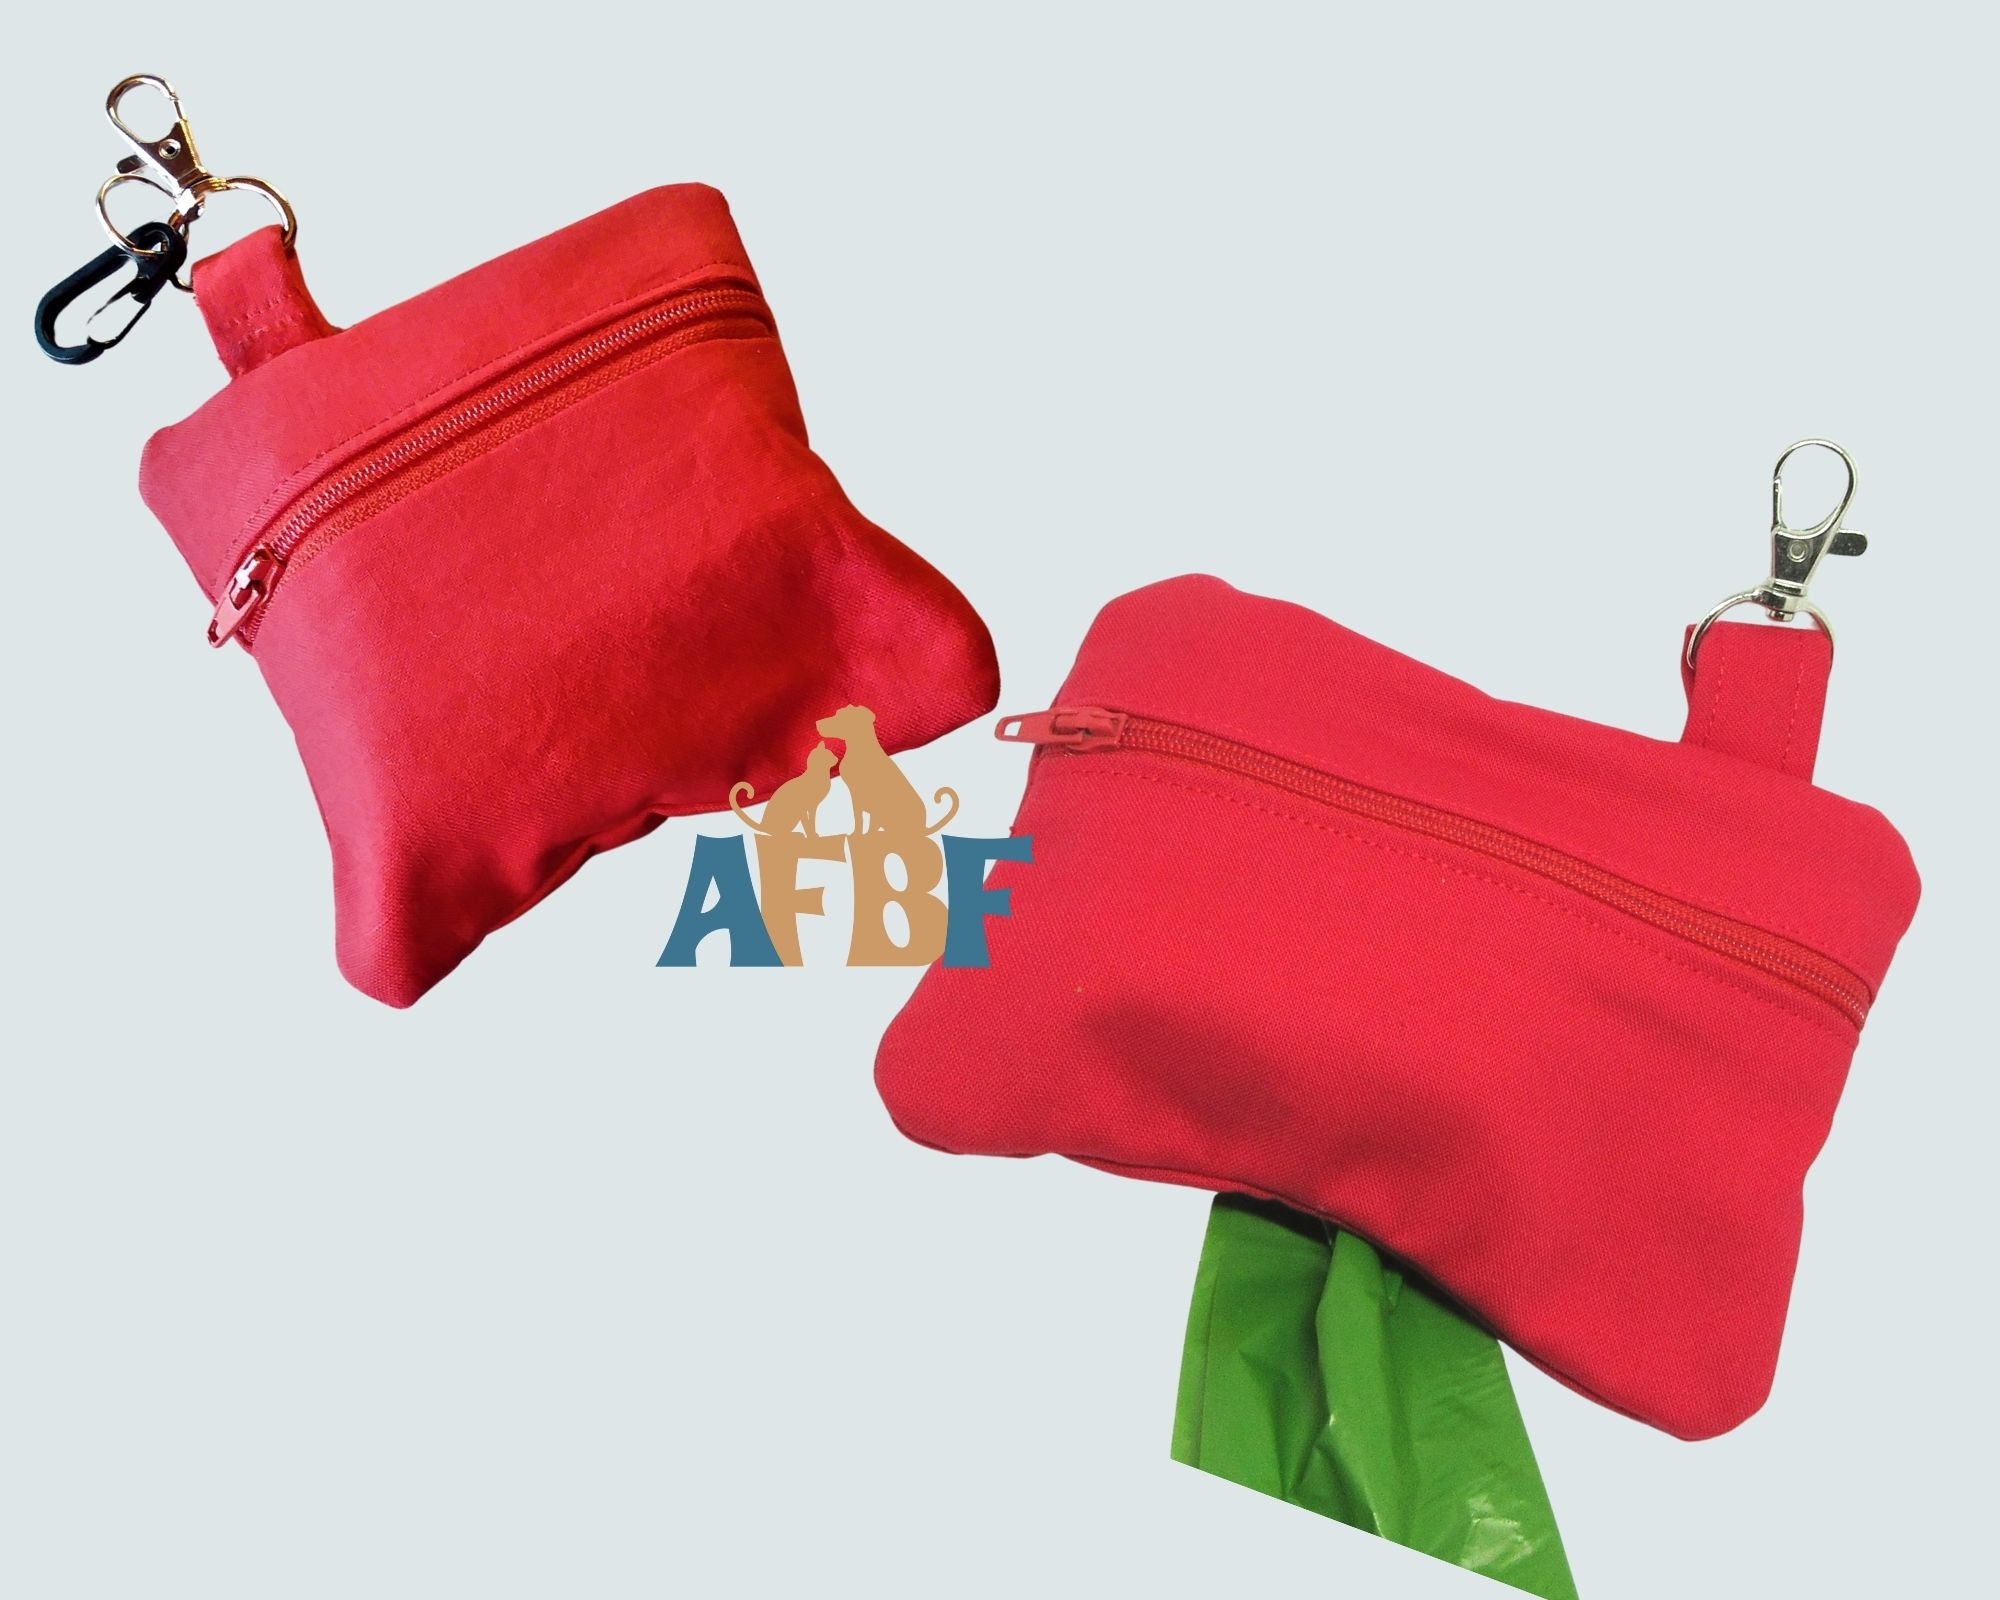 Red color dog poop bag holder, Your Fur Baby is adorable – but sometime they just have to go – poop that is. You can be ready?

Give one of these pretty zip bags to hold the bags you need for the quick pick up while you walk your dog. We have many colors and  two shapes

Square  4" x 4"  or Bone shape 3 1/2" x 5"